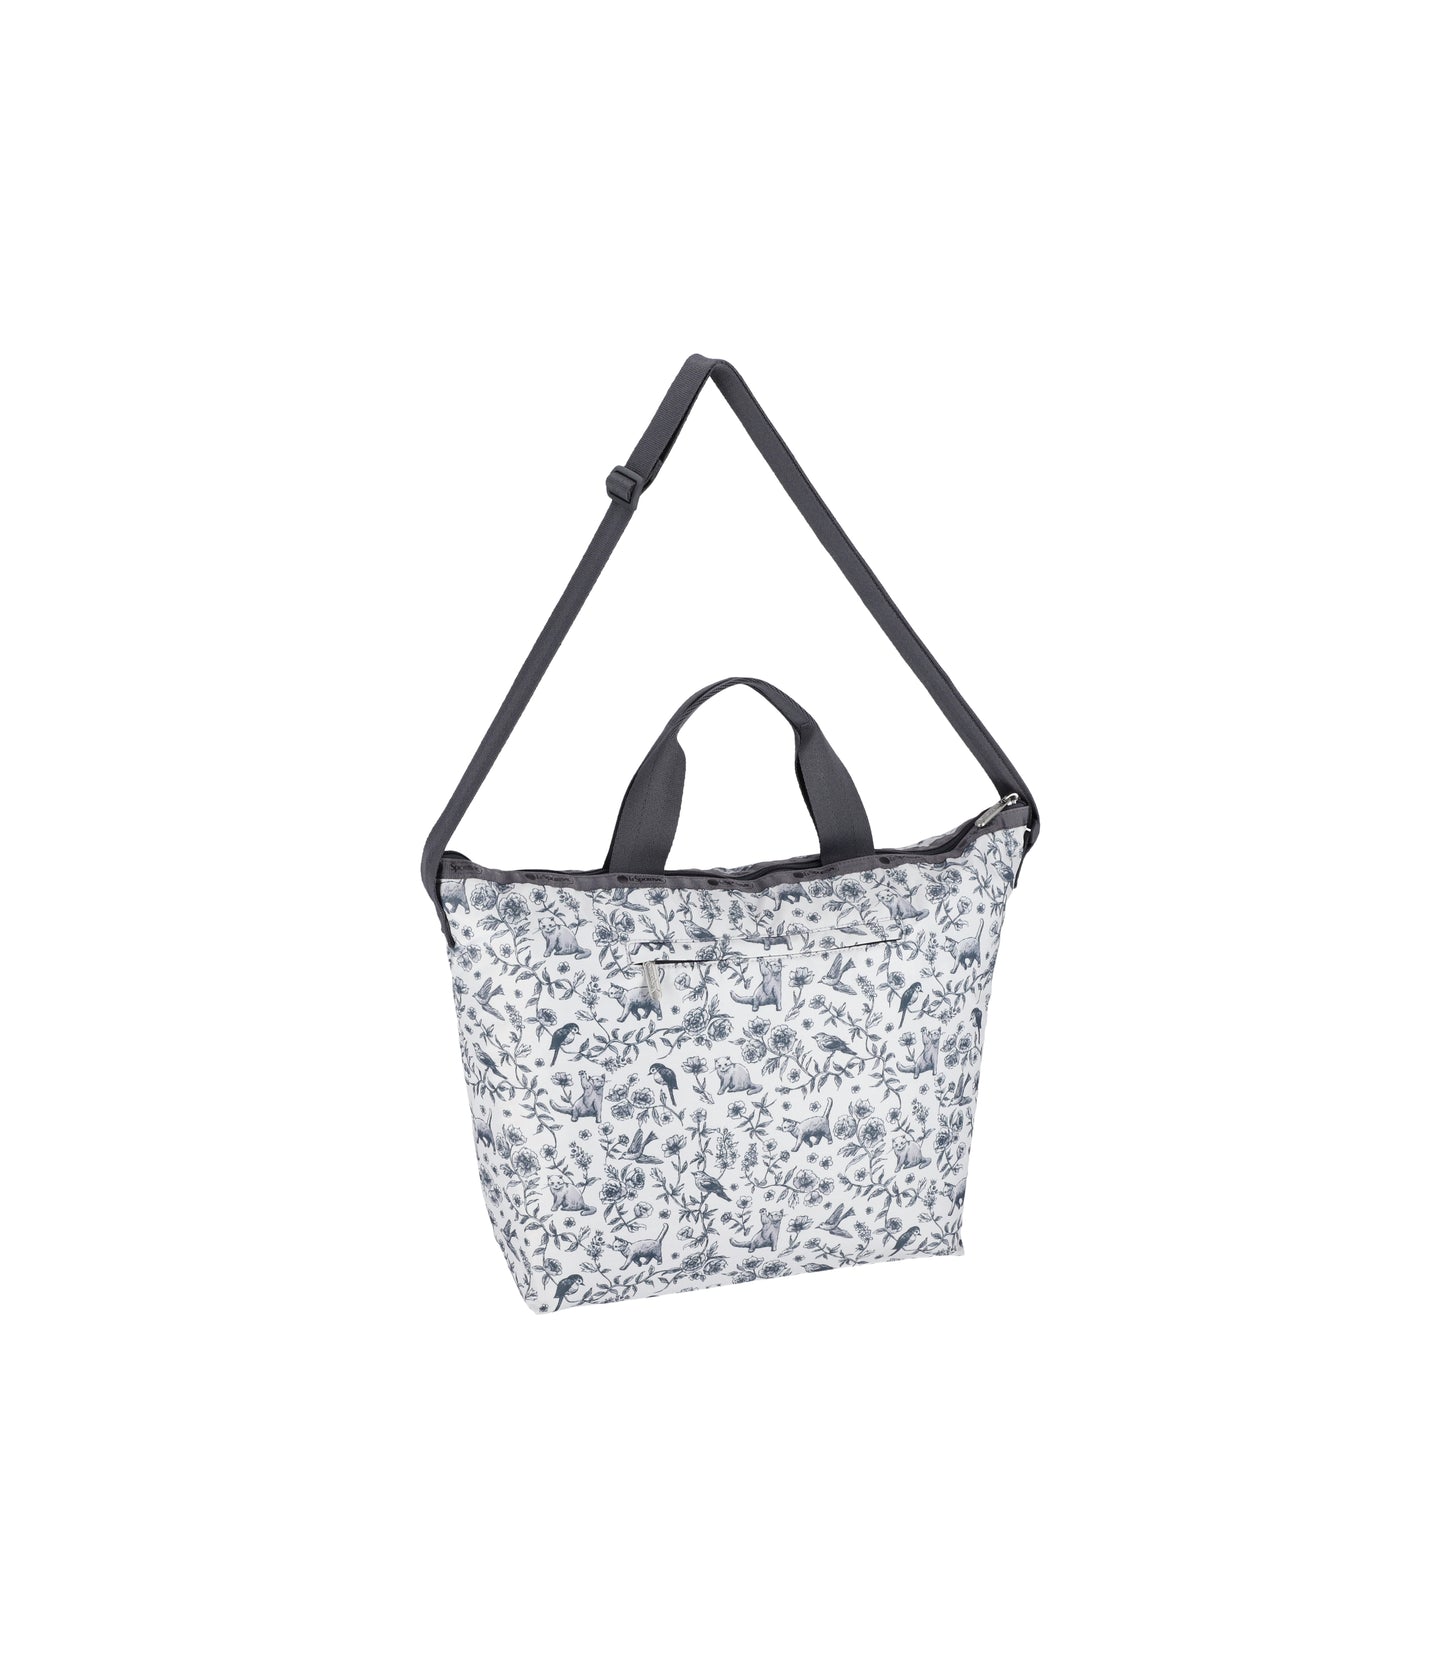 Deluxe Easy Carry Tote<br>Floral Birds And Cats